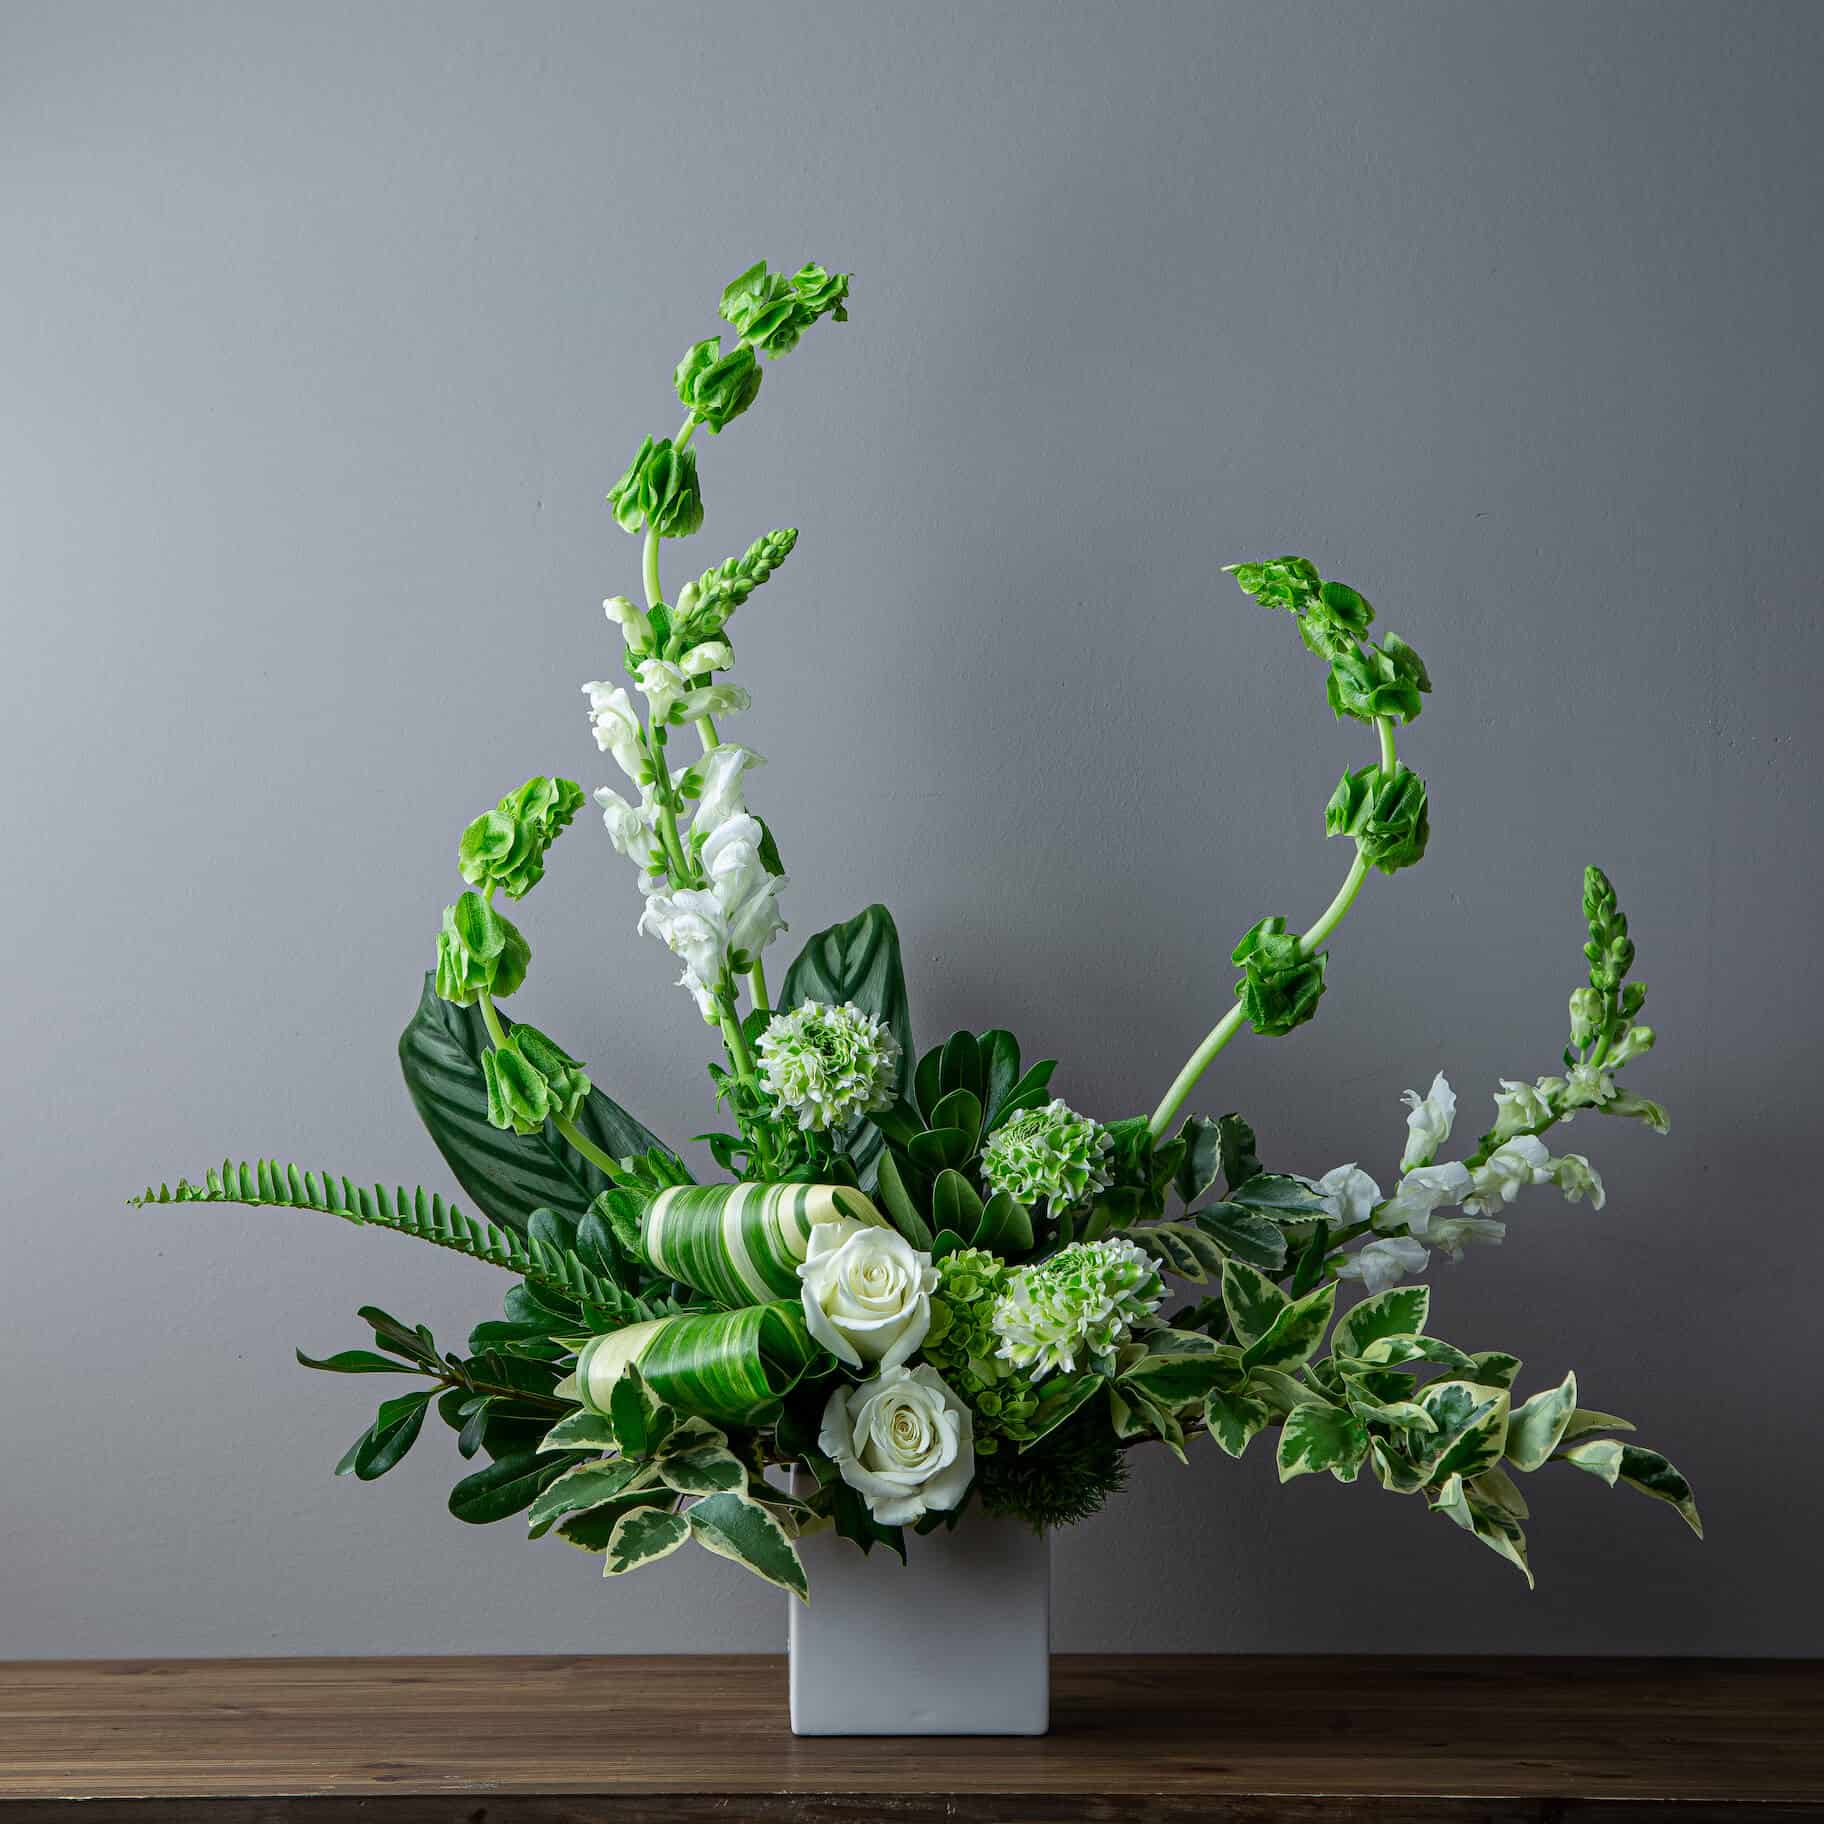 floral arrangement In a white vase with white and green Floral such as White roses, bells of Ireland, and white snapdragons , Ivory Florist, same day flower delivery in Irvine Ca.